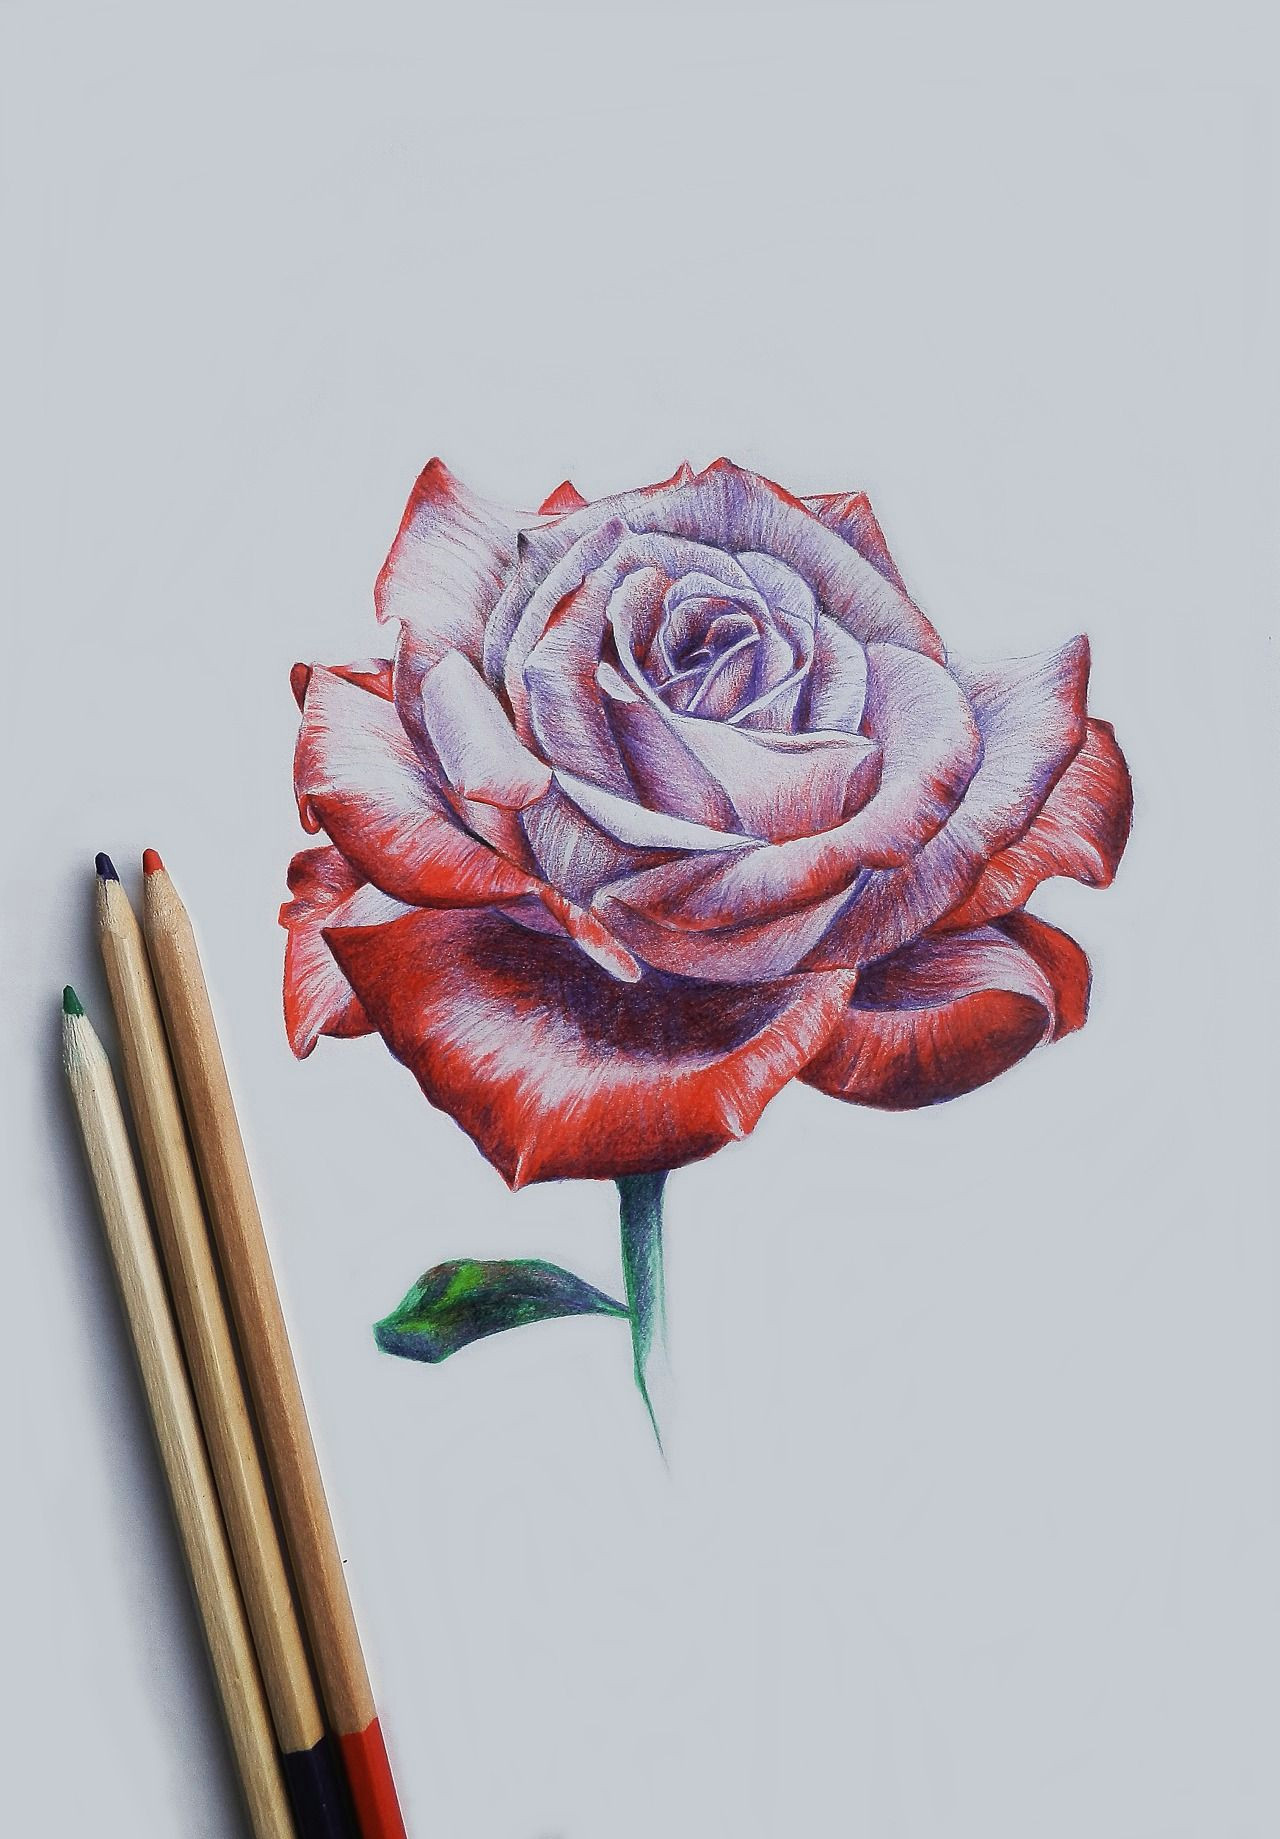 Drawings Of Roses with Color Drawing Rose Art Drawi